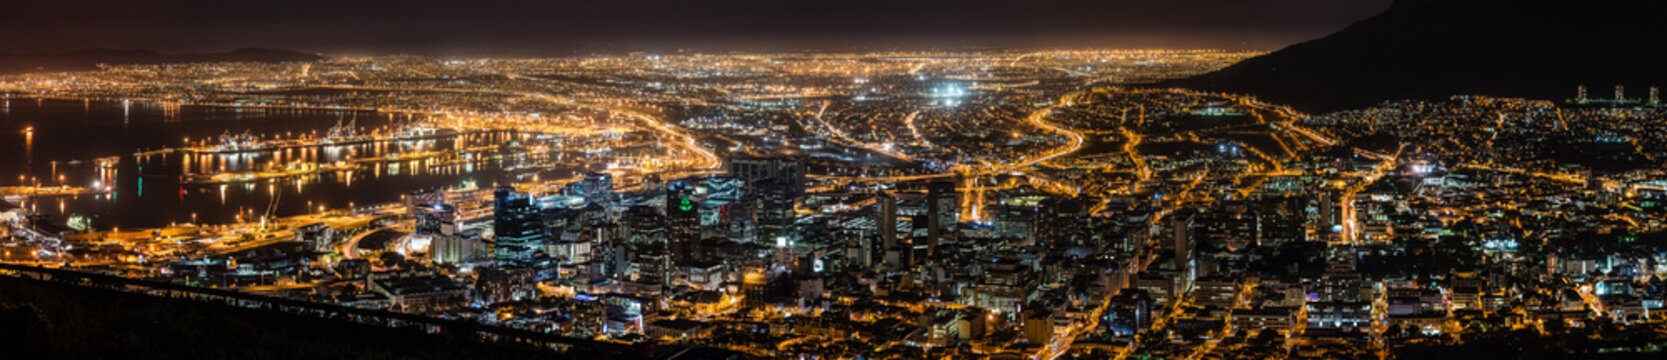 Cape Town at night © HandmadePictures